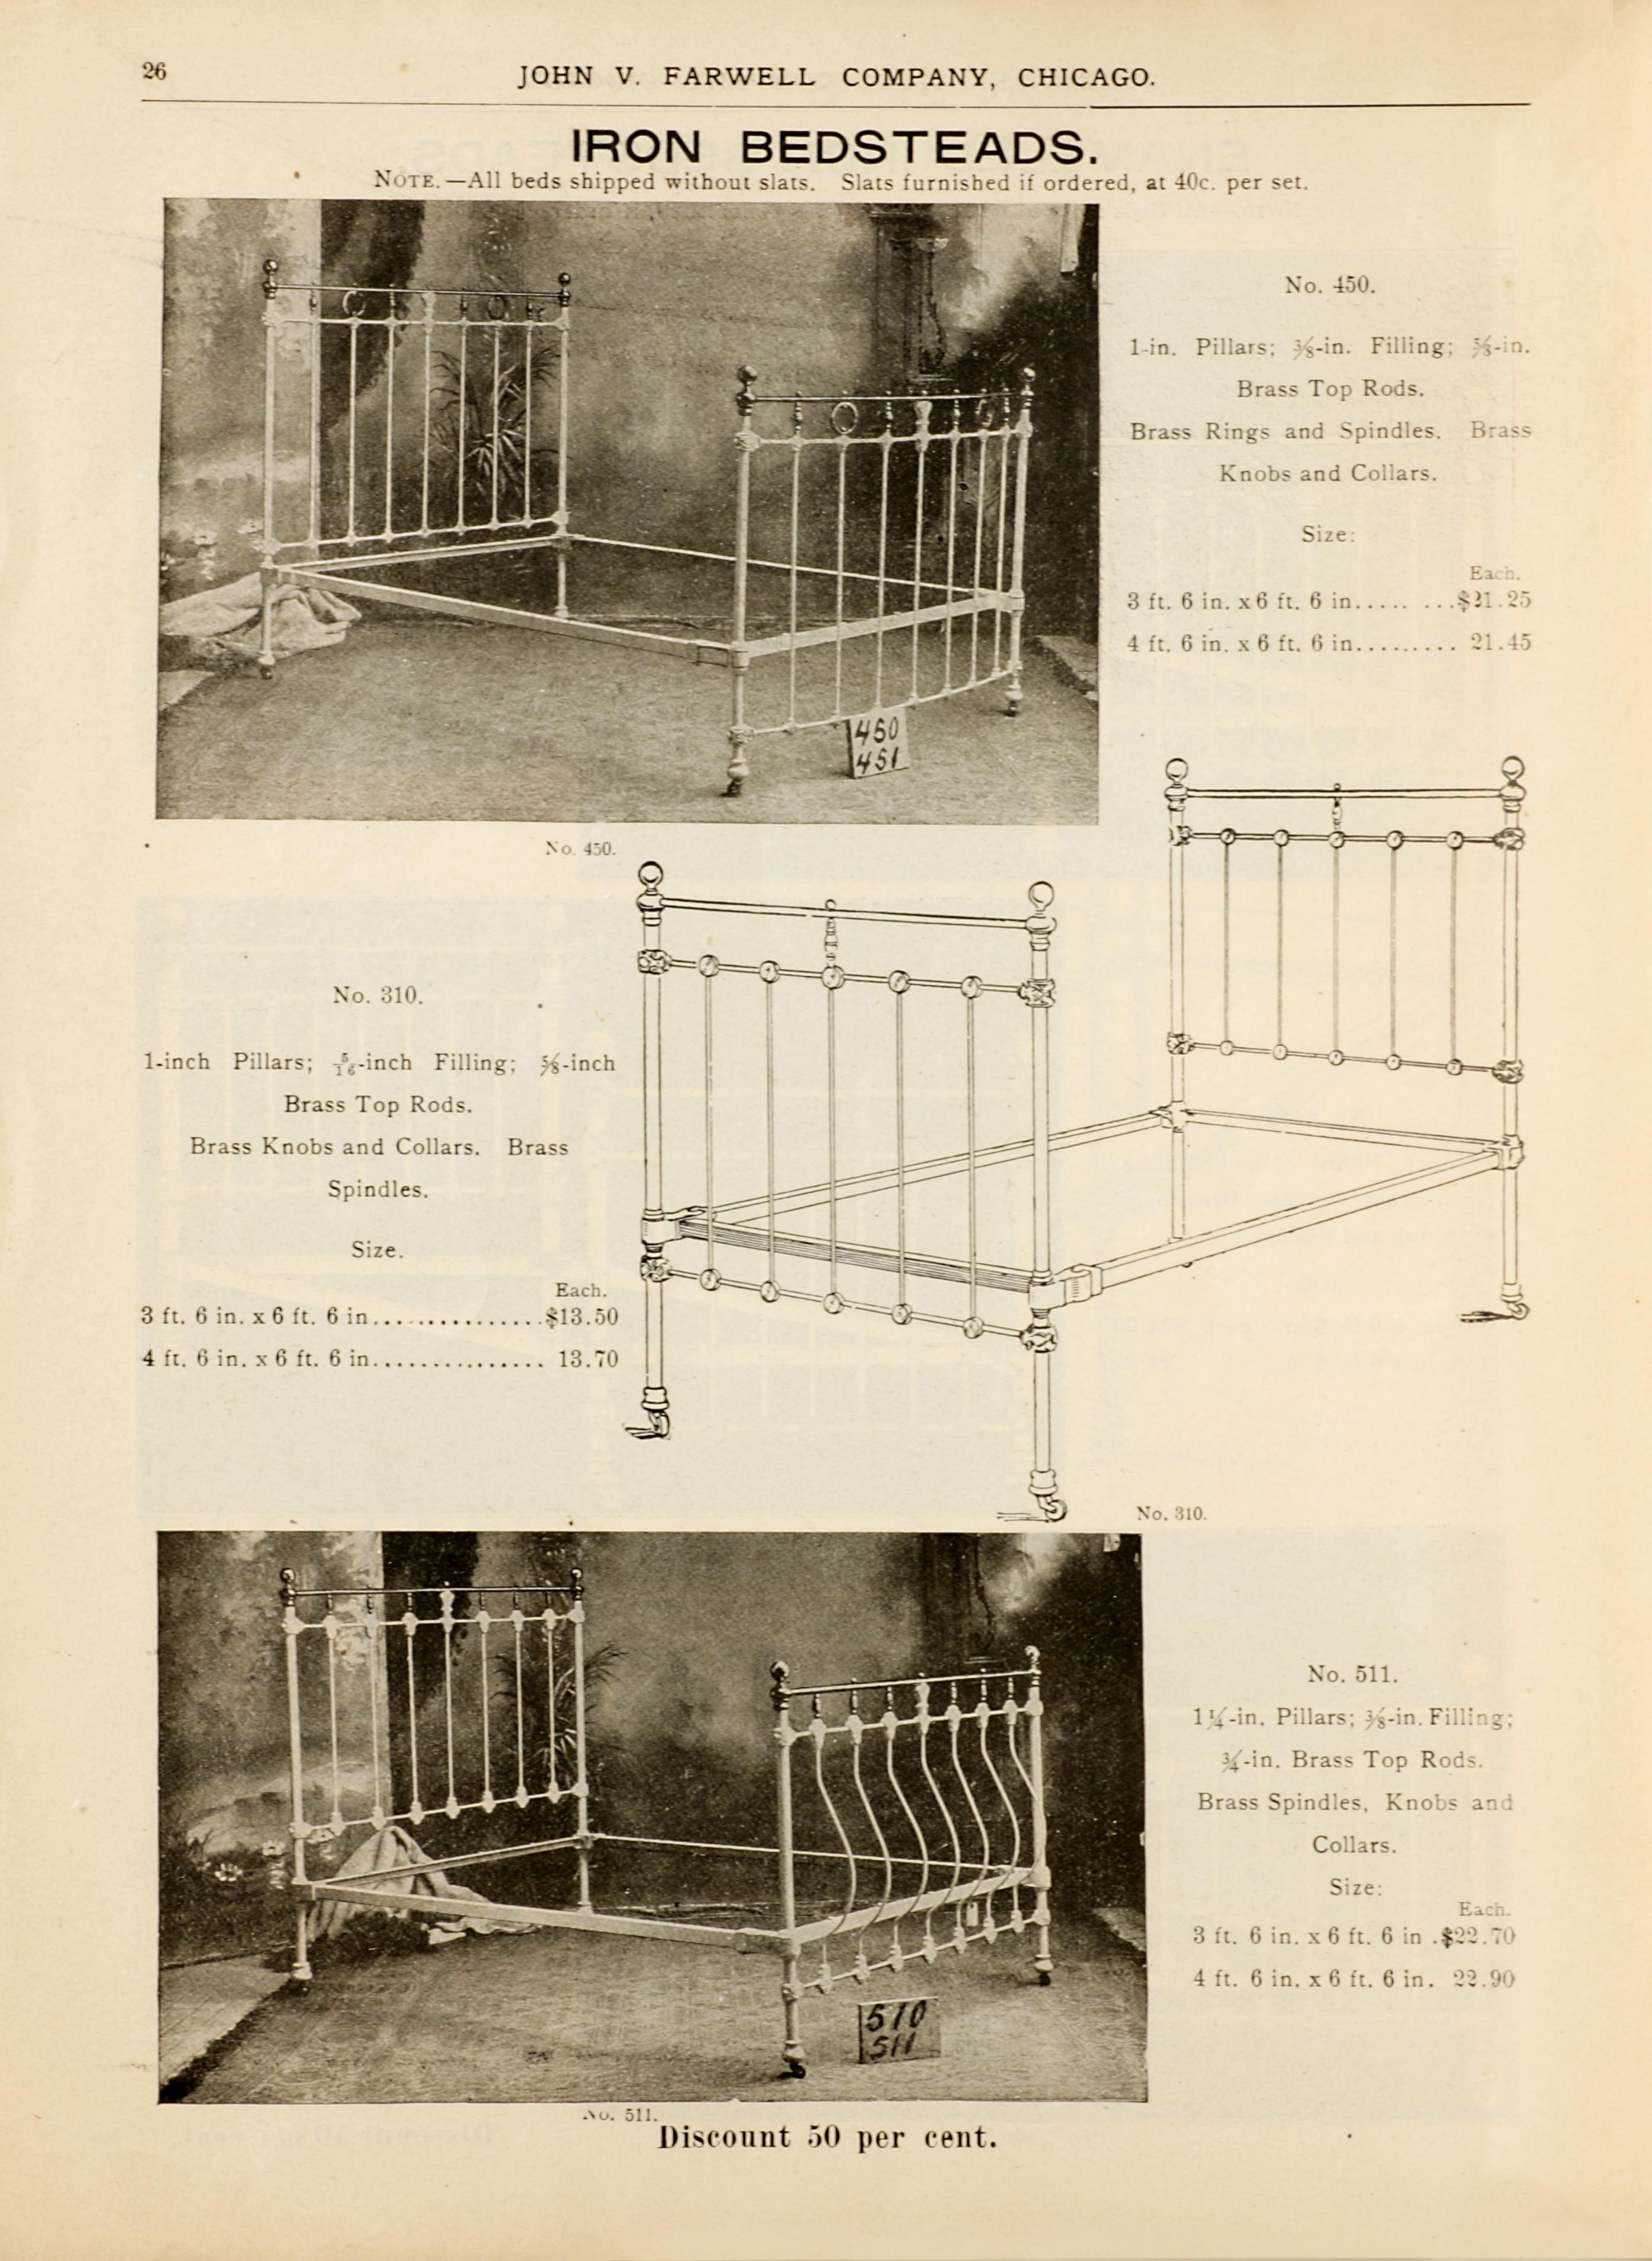 John V. Farwell Iron Bed Catalog, Chicago 1895- Page 18